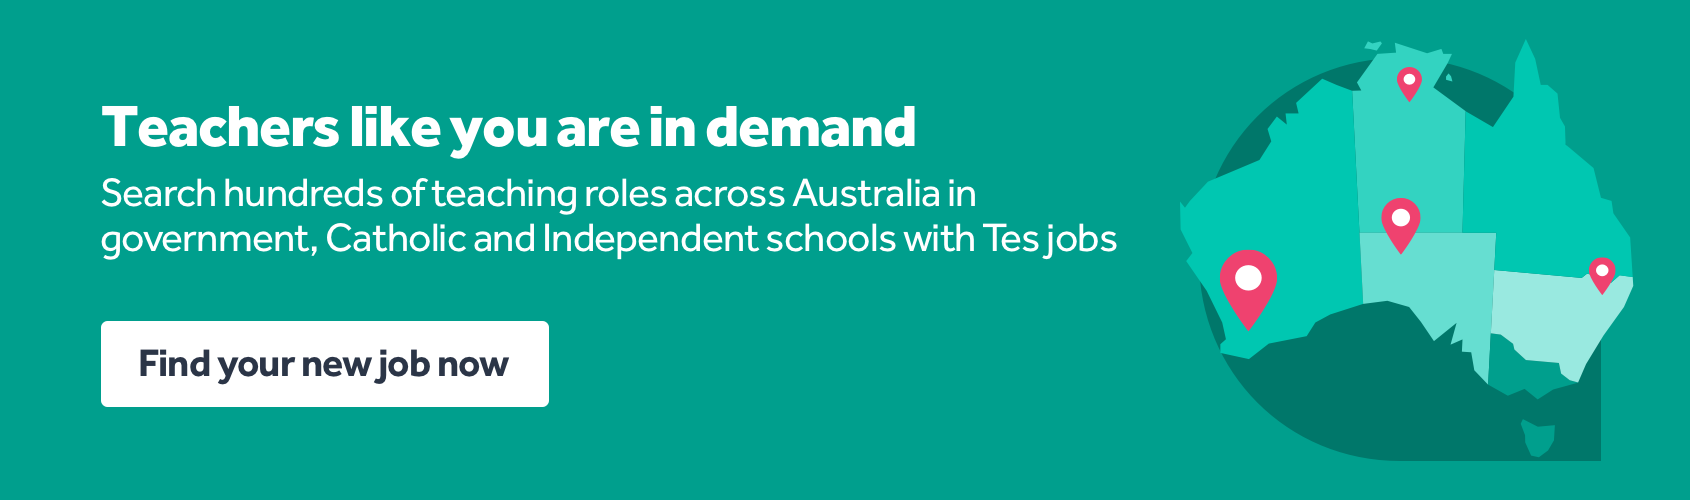 Teachers like you are in demand - Tes